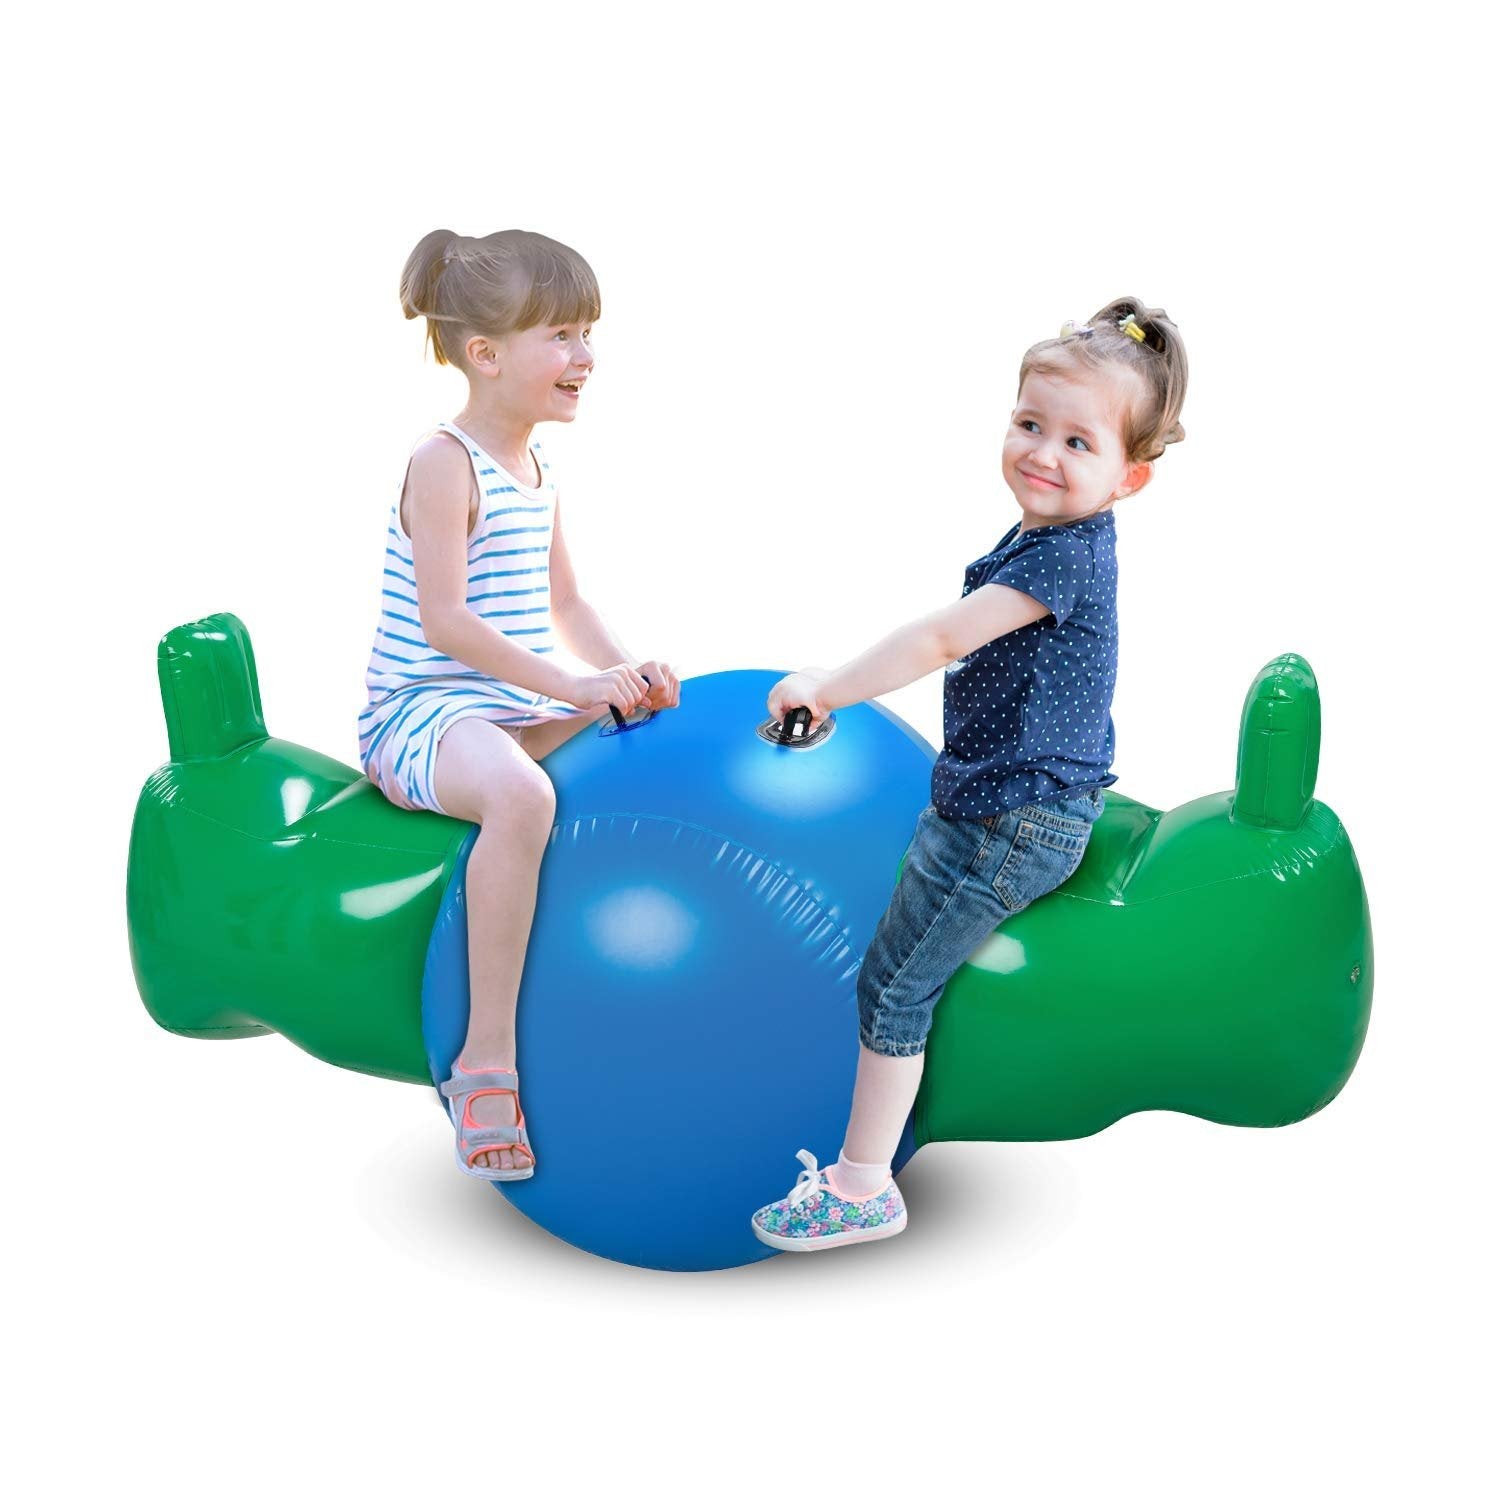 Bundaloo Inflatable Seesaw Rocker - Indoor & Outdoor Rocking Toy for Children - Thick PVC, Safety Handles, Back Rest - Fun See Saw Riding Playset for Playgrounds, Backyard, Garden, Kids Room